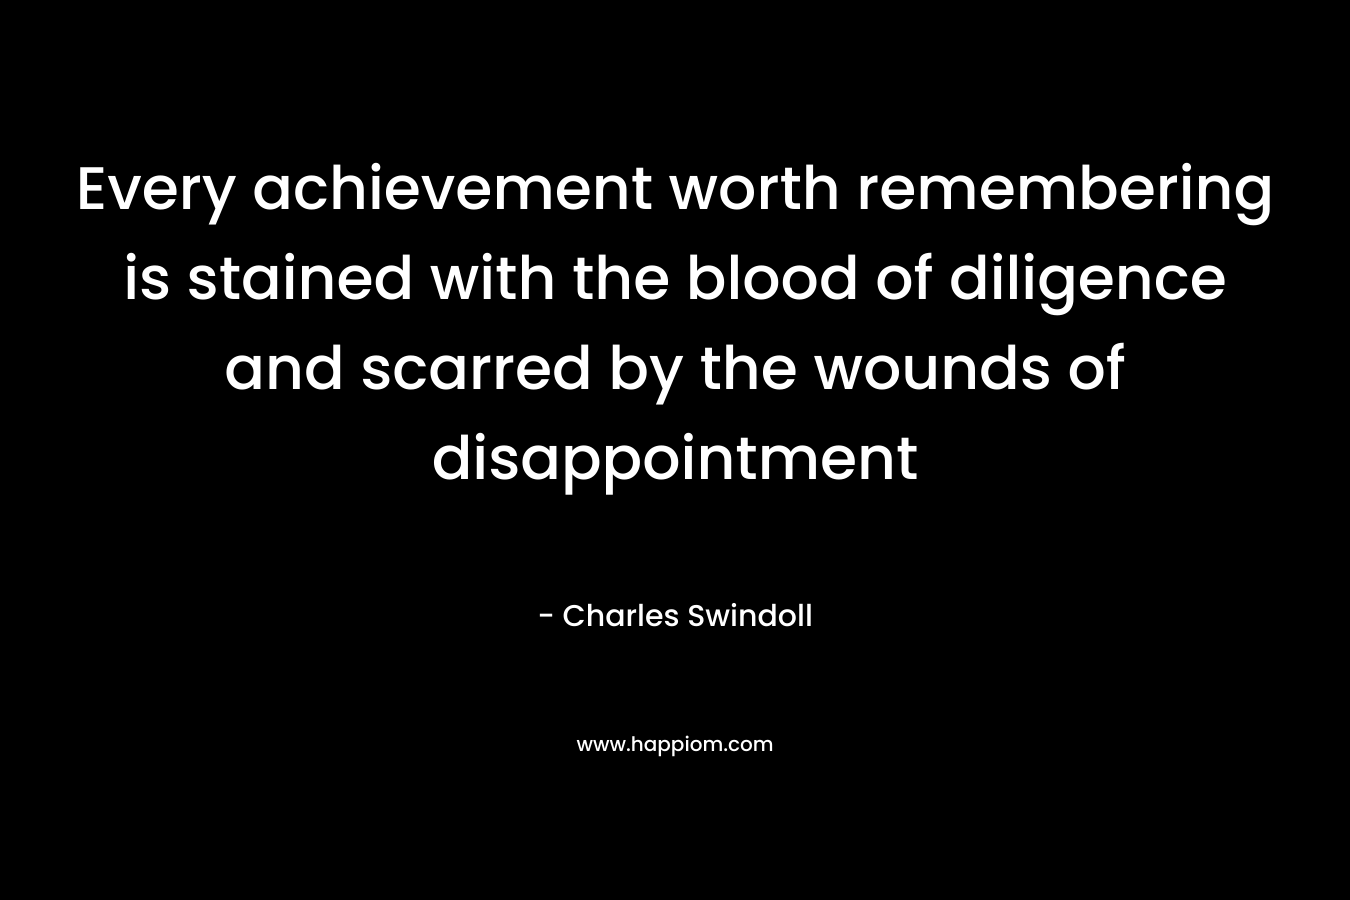 Every achievement worth remembering is stained with the blood of diligence and scarred by the wounds of disappointment – Charles Swindoll